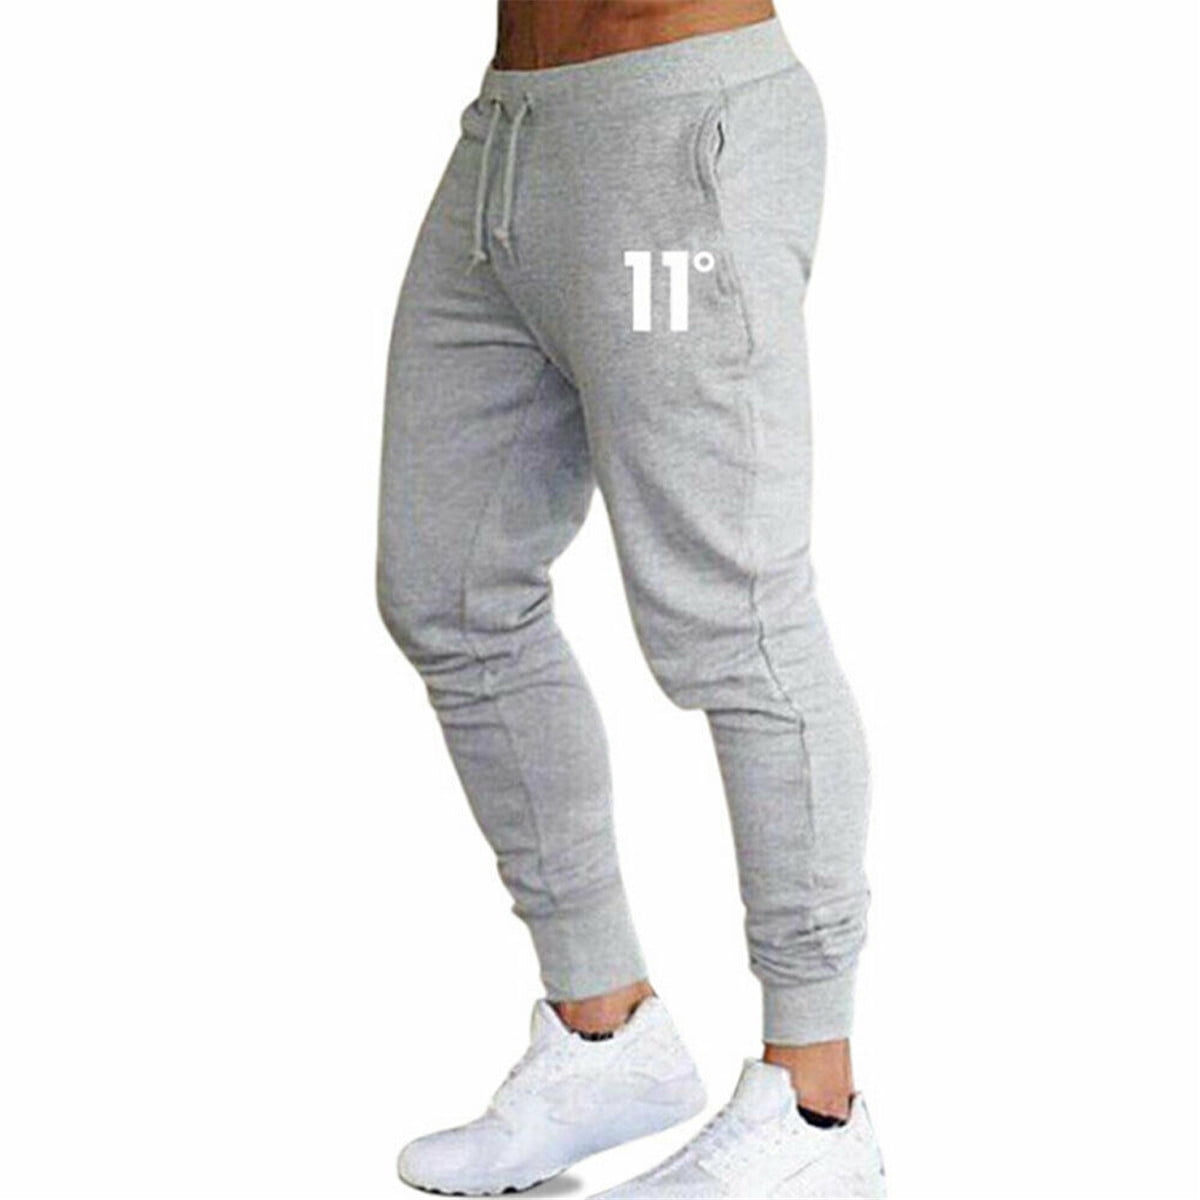 ZENGVEE Tracksuit Trousers Men Lightweight Joggers Men Elasticated Waist Athletic Sweatpants Mens Tracksuits Bottoms with Pockets for Workout,Gym,Running,Training 